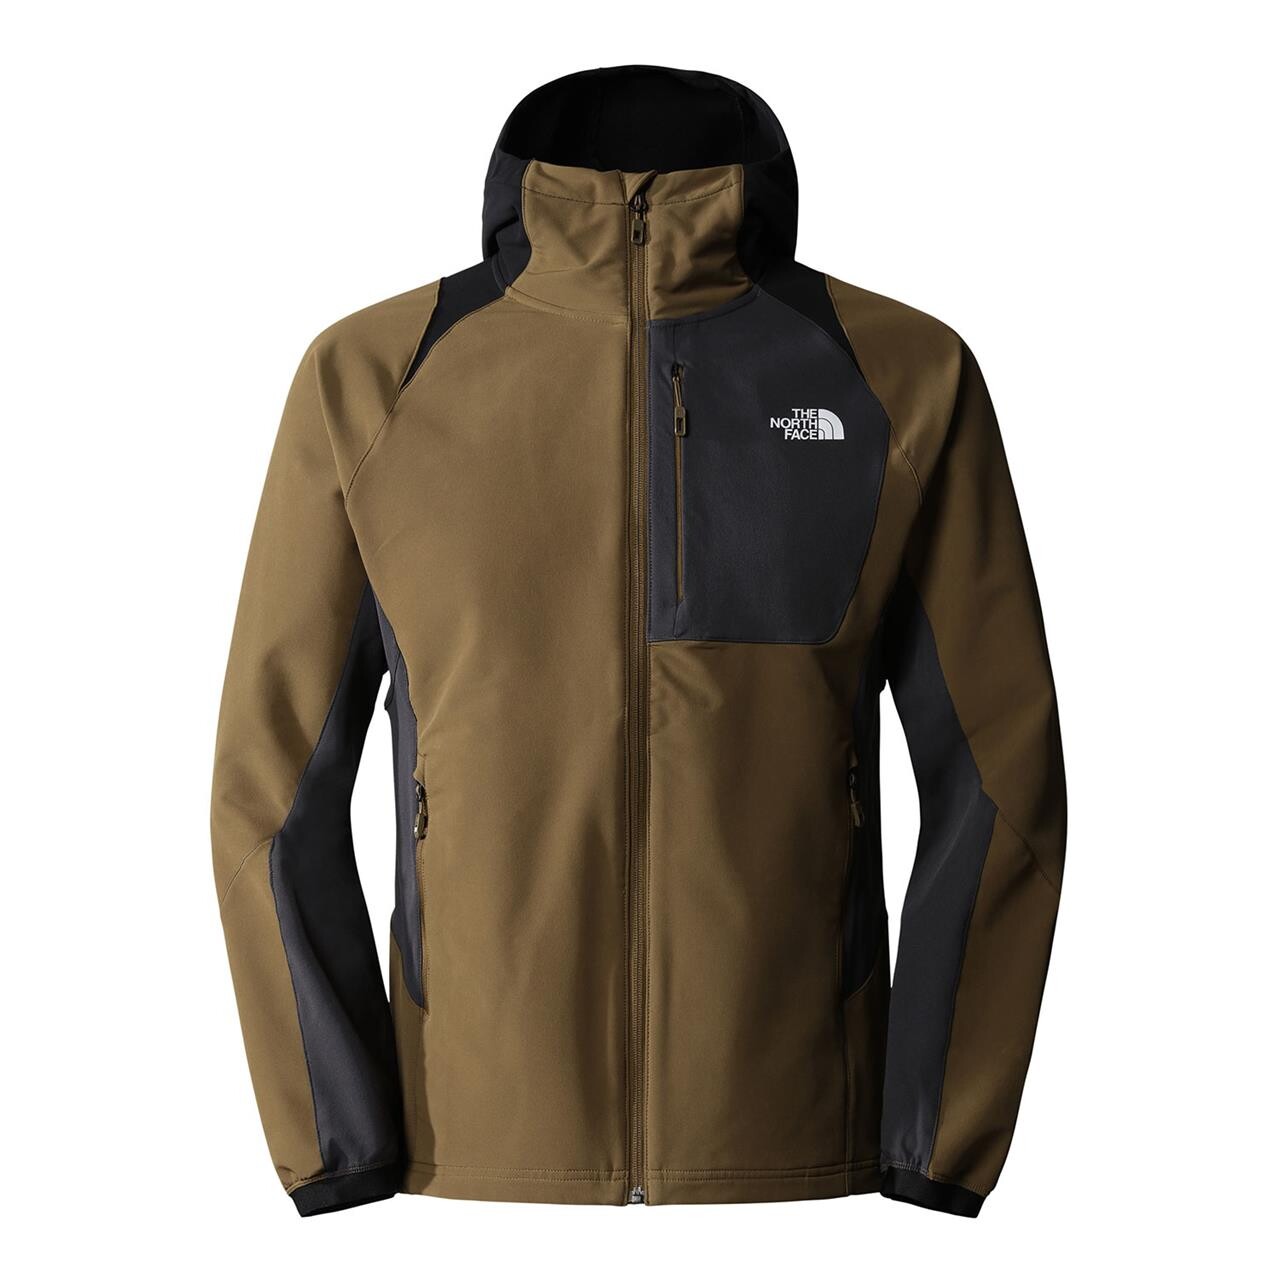 The North Face Mens Ao Softshell Hoodie (Grøn (MILITARY OLIVE/ASPH GREY/BLK) Medium)